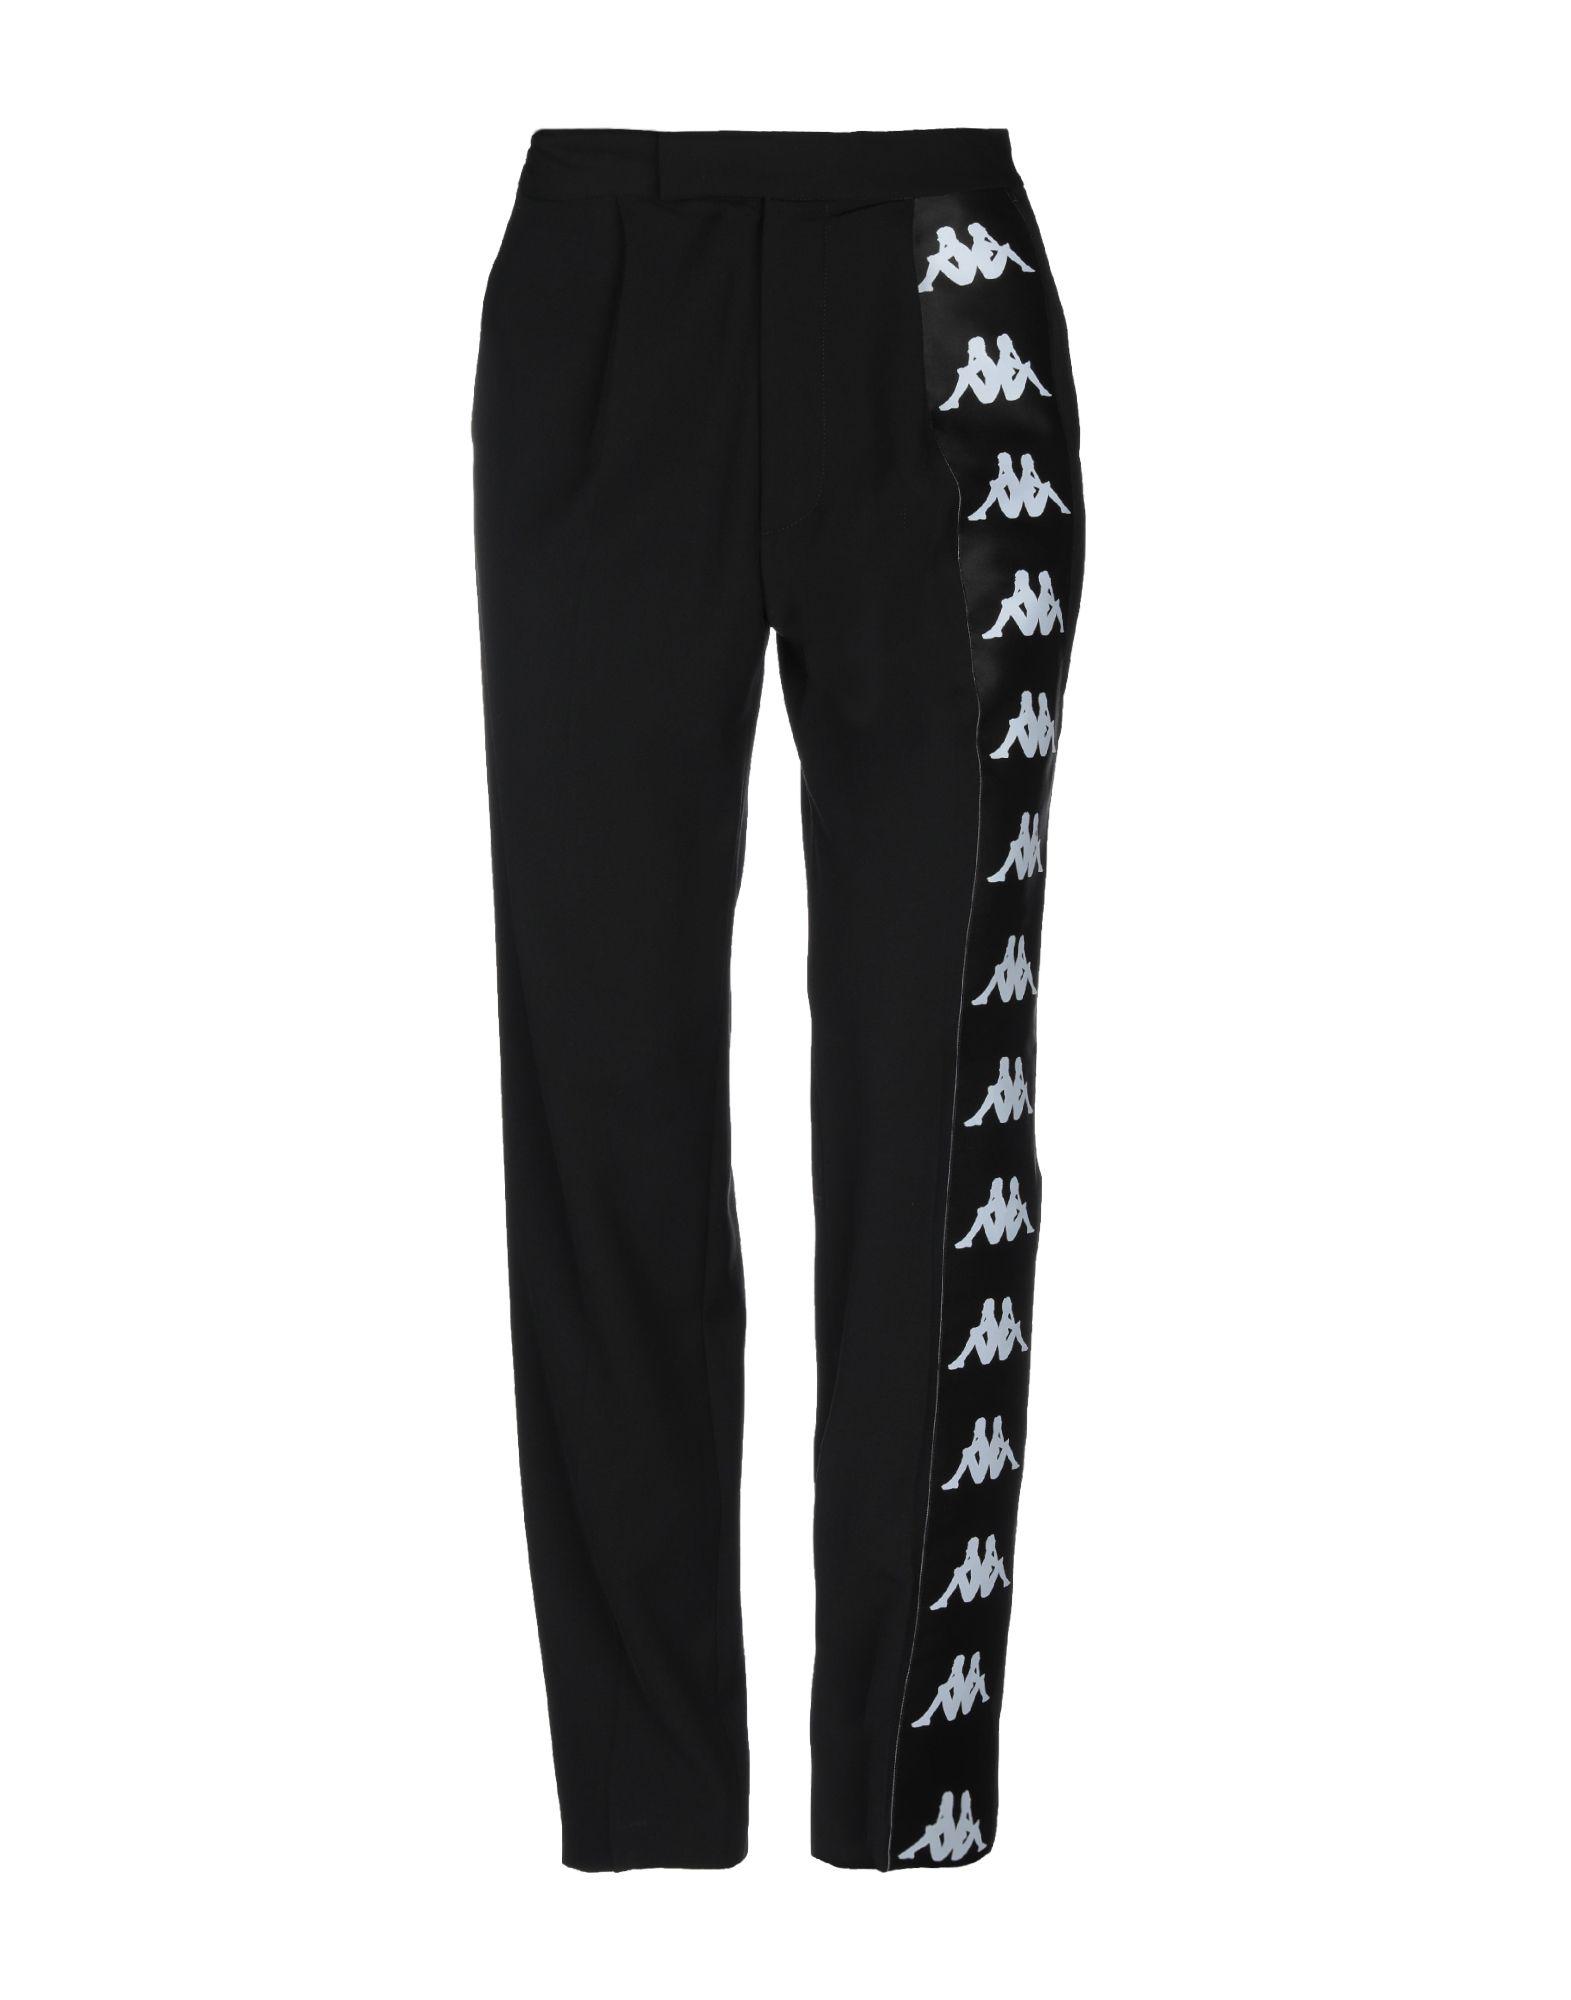 Kappa Synthetic Casual Pants in Black - Lyst